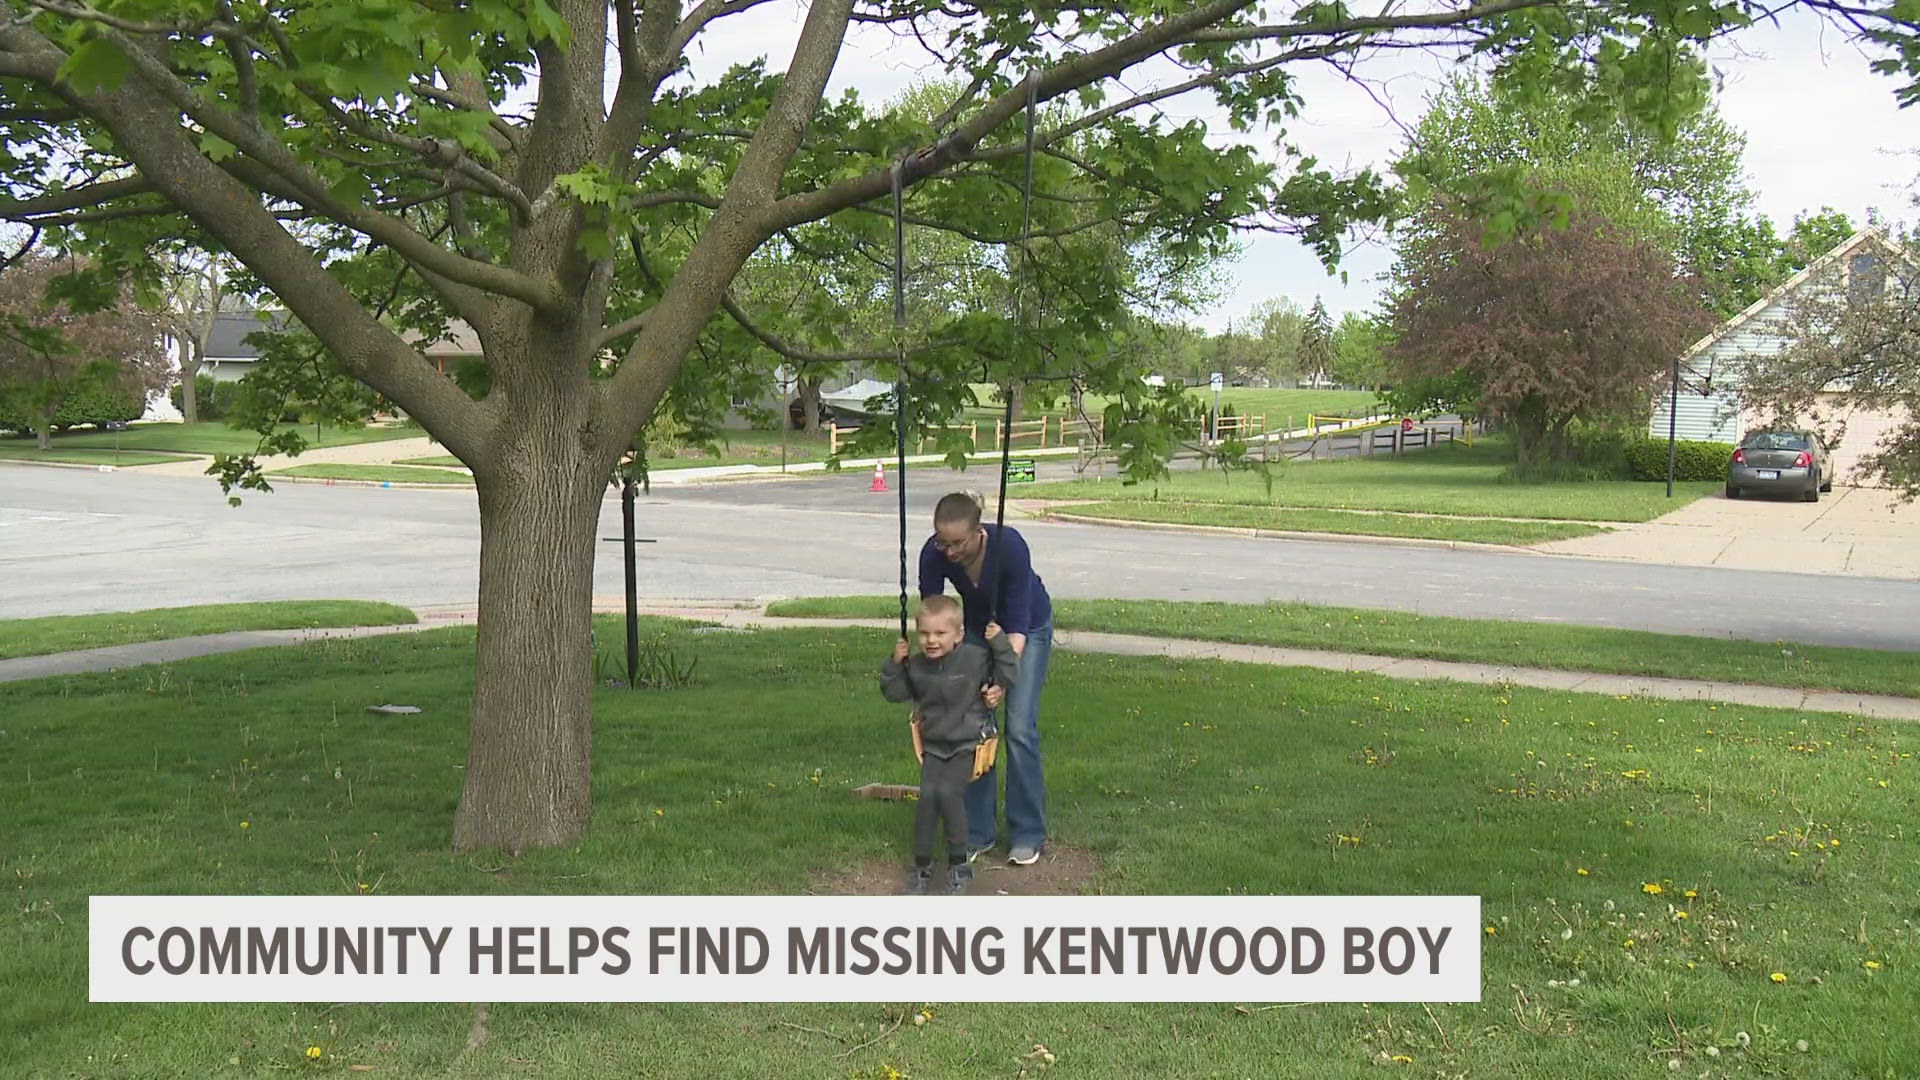 Angie Hinkle said her son Bennie went missing after playing in the yard.